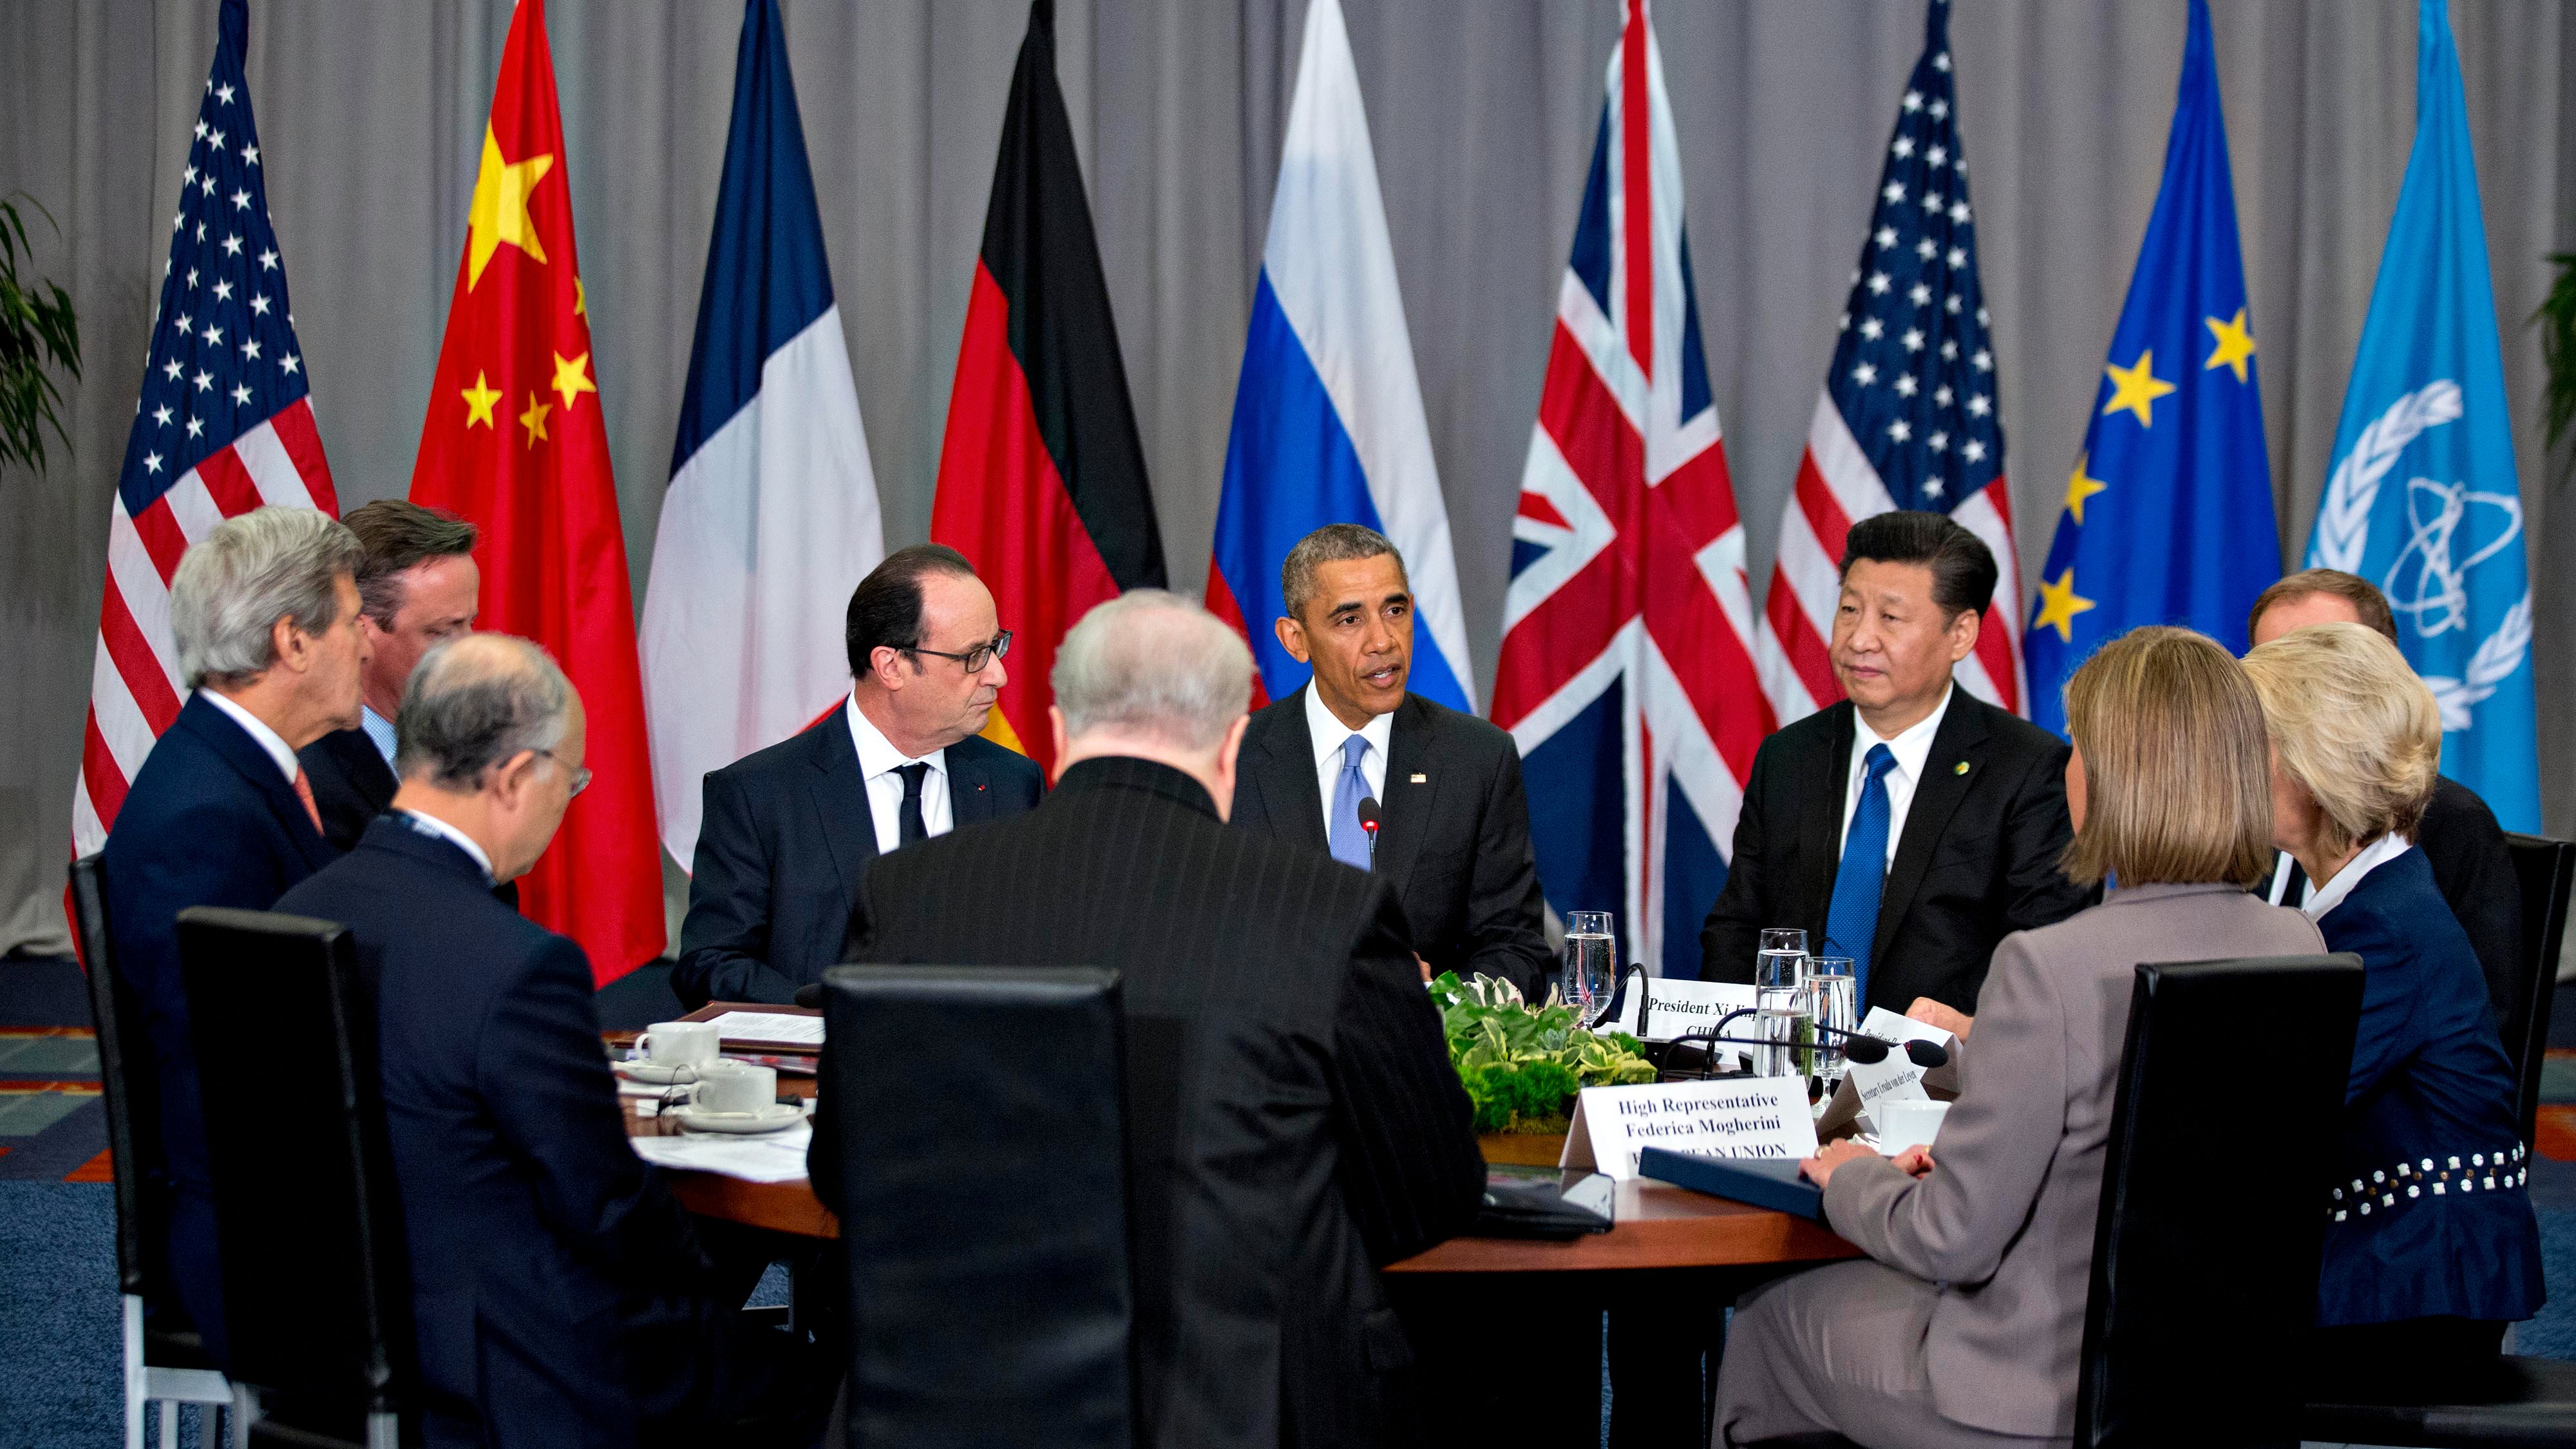 President Obama Participates In The Nuclear Security Summit